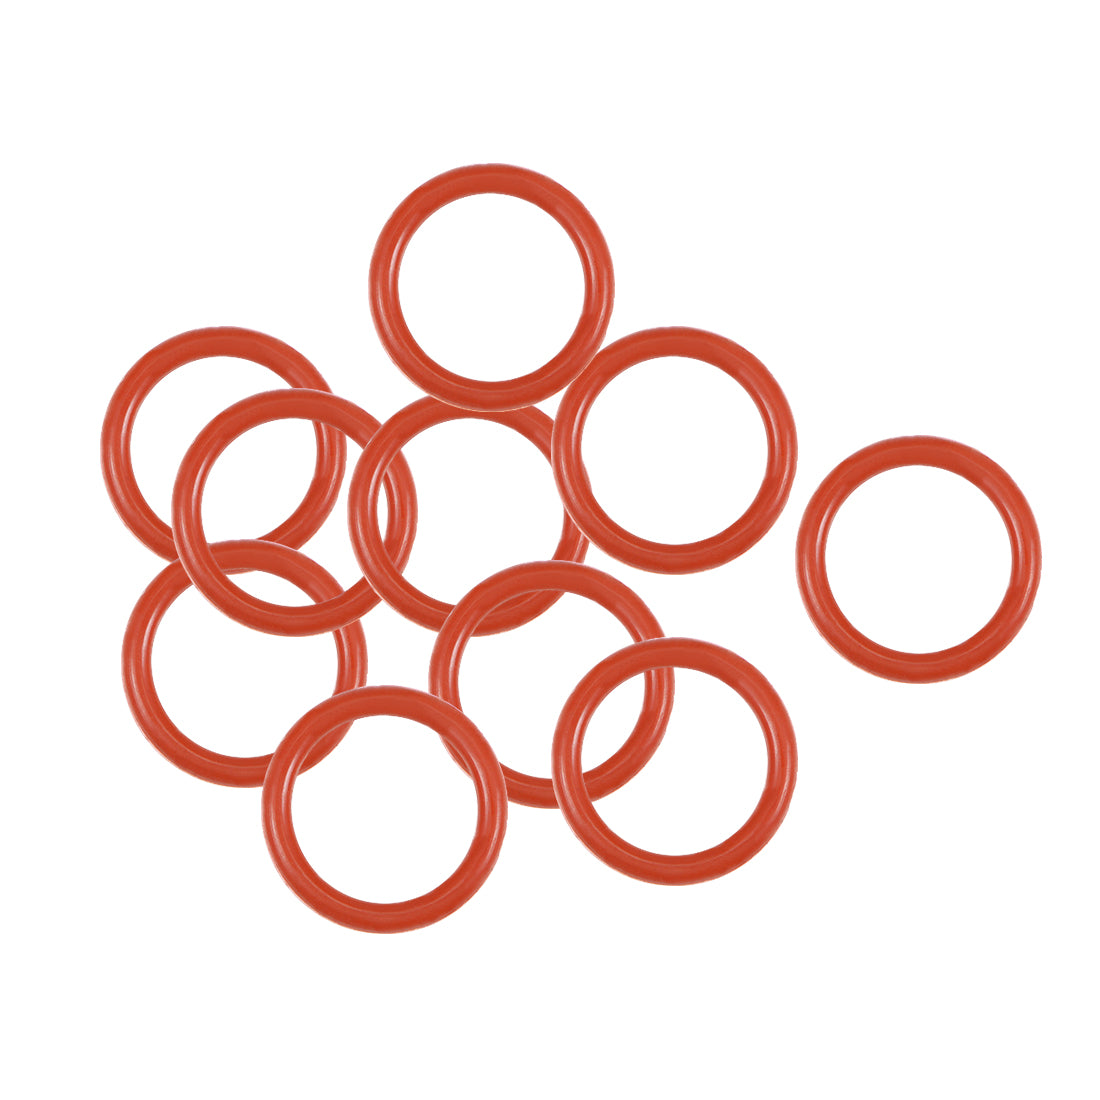 uxcell Uxcell Silicone O-Rings 8mm OD, 6mm Inner Diameter, 1mm Width, Seal Gasket Red 10Pcs